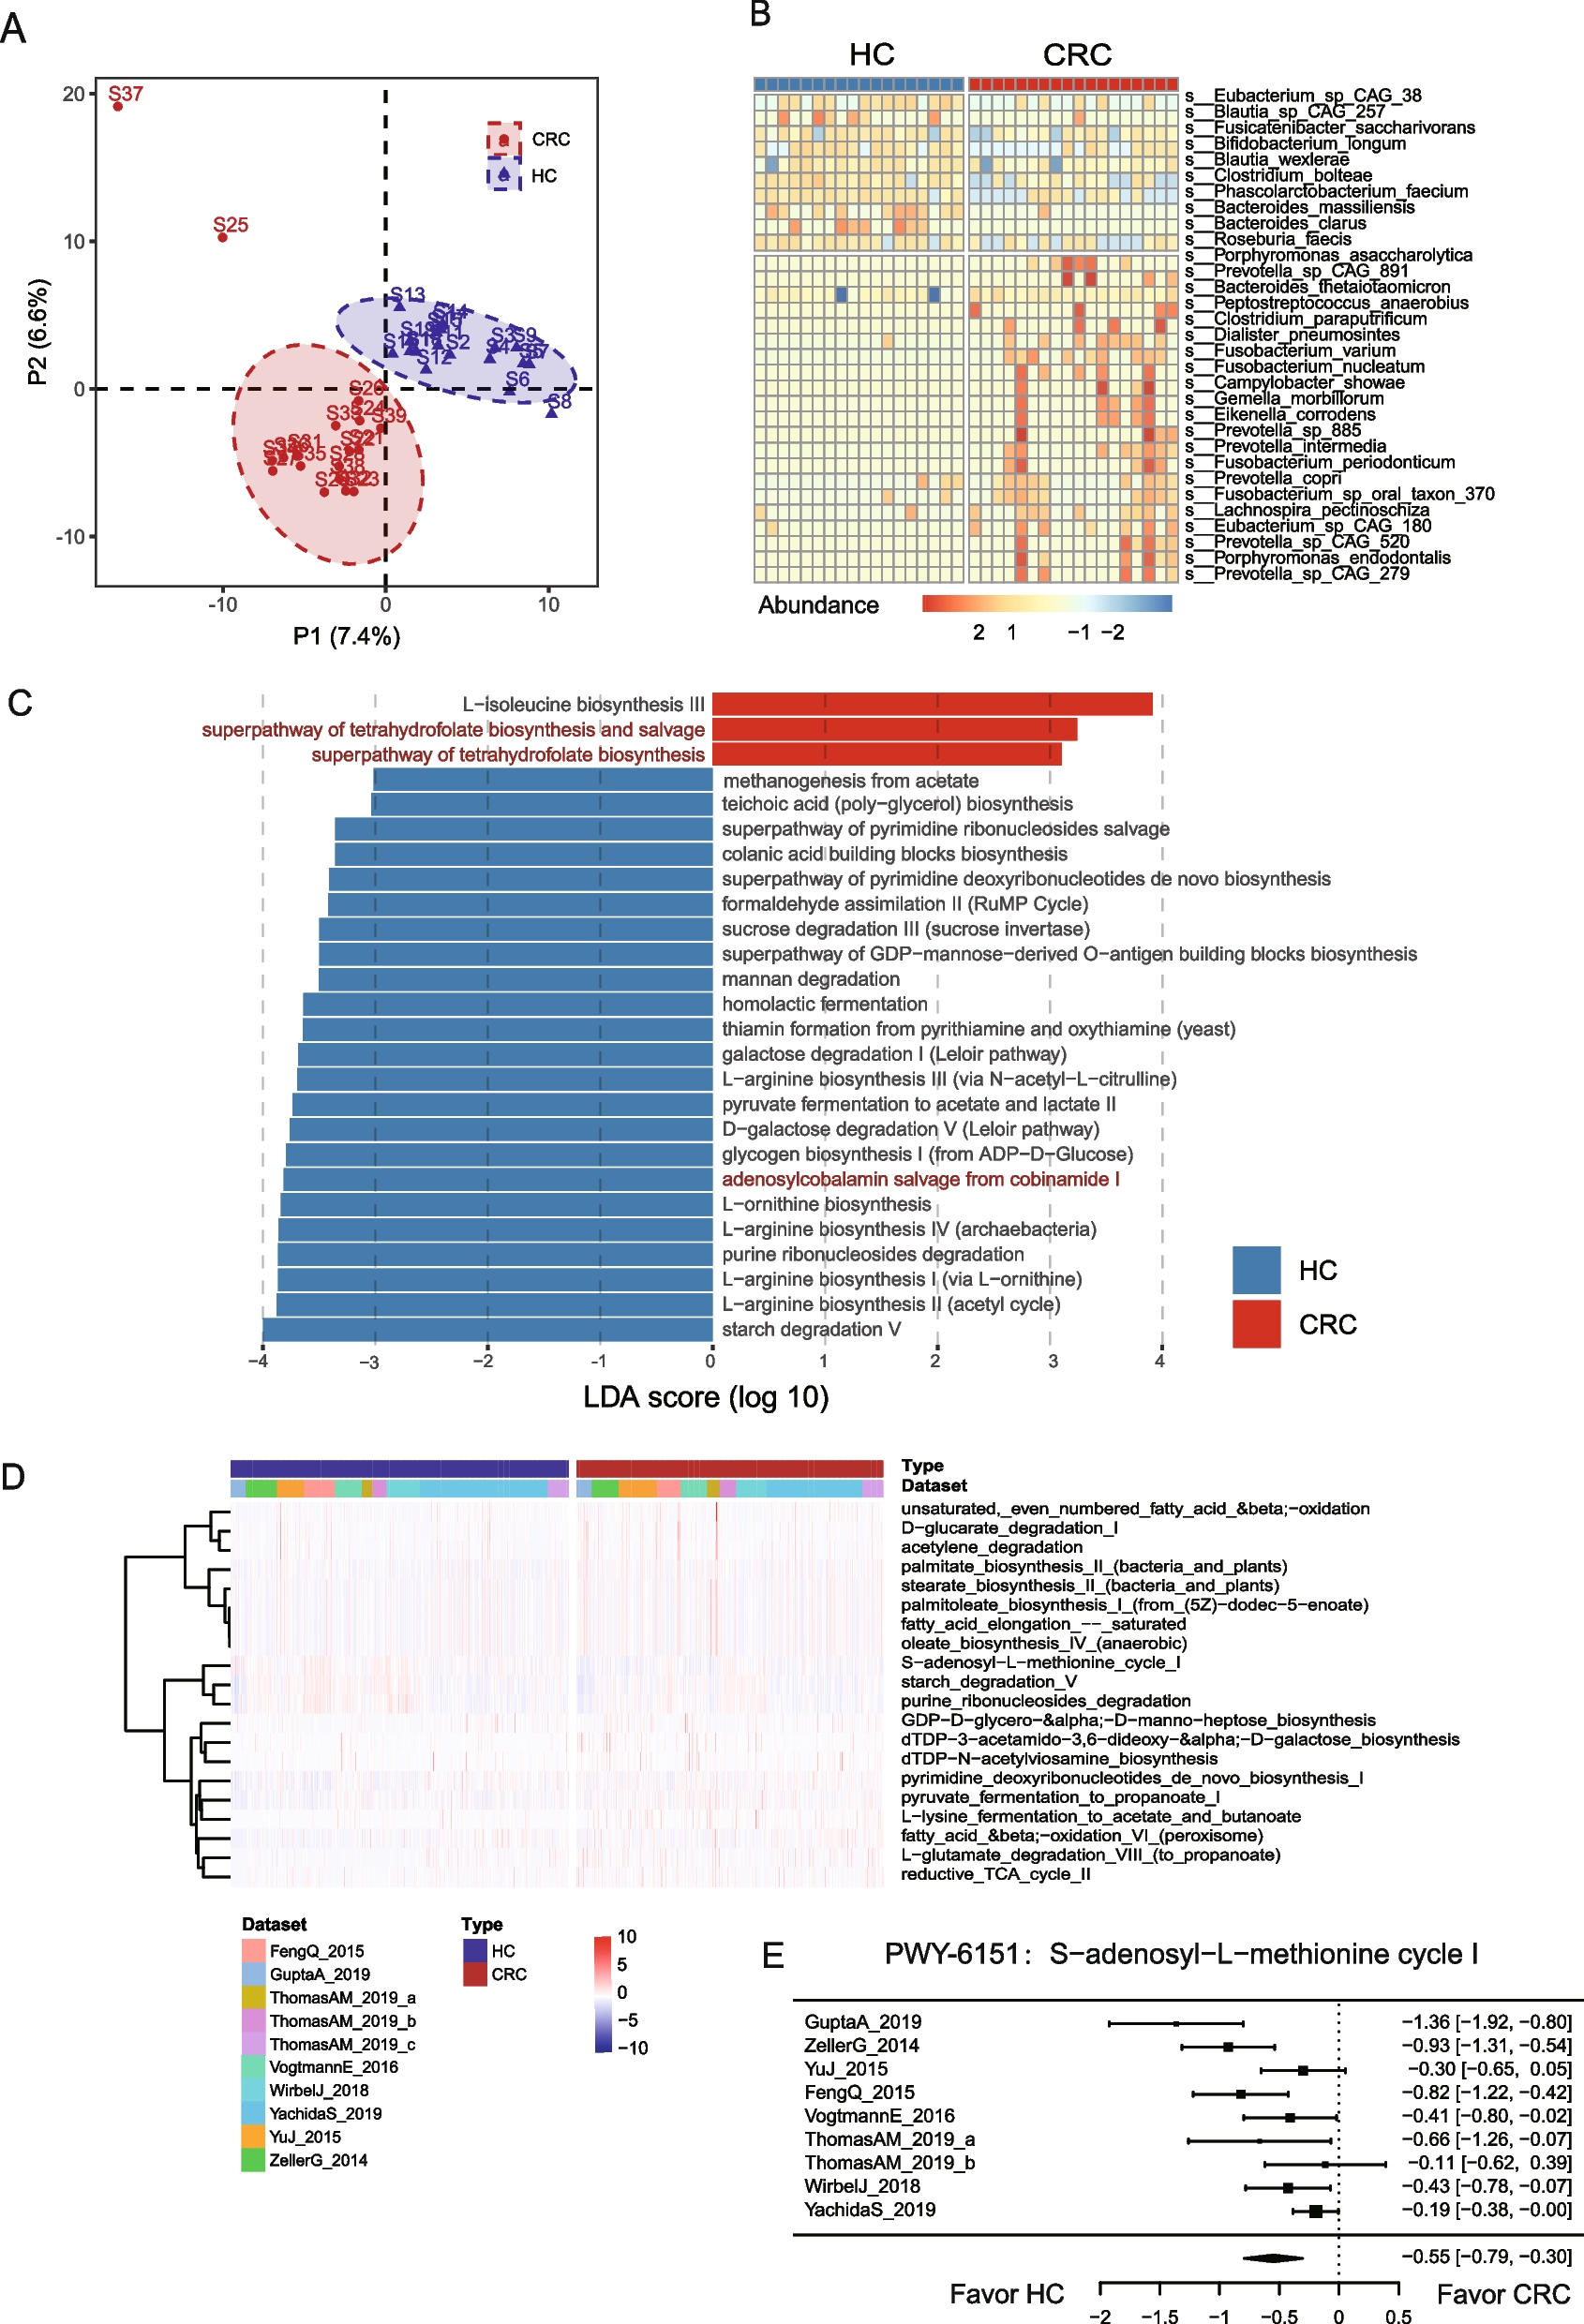 Colorectal cancer microbiome programs DNA methylation of host cells by affecting methyl donor metabolism